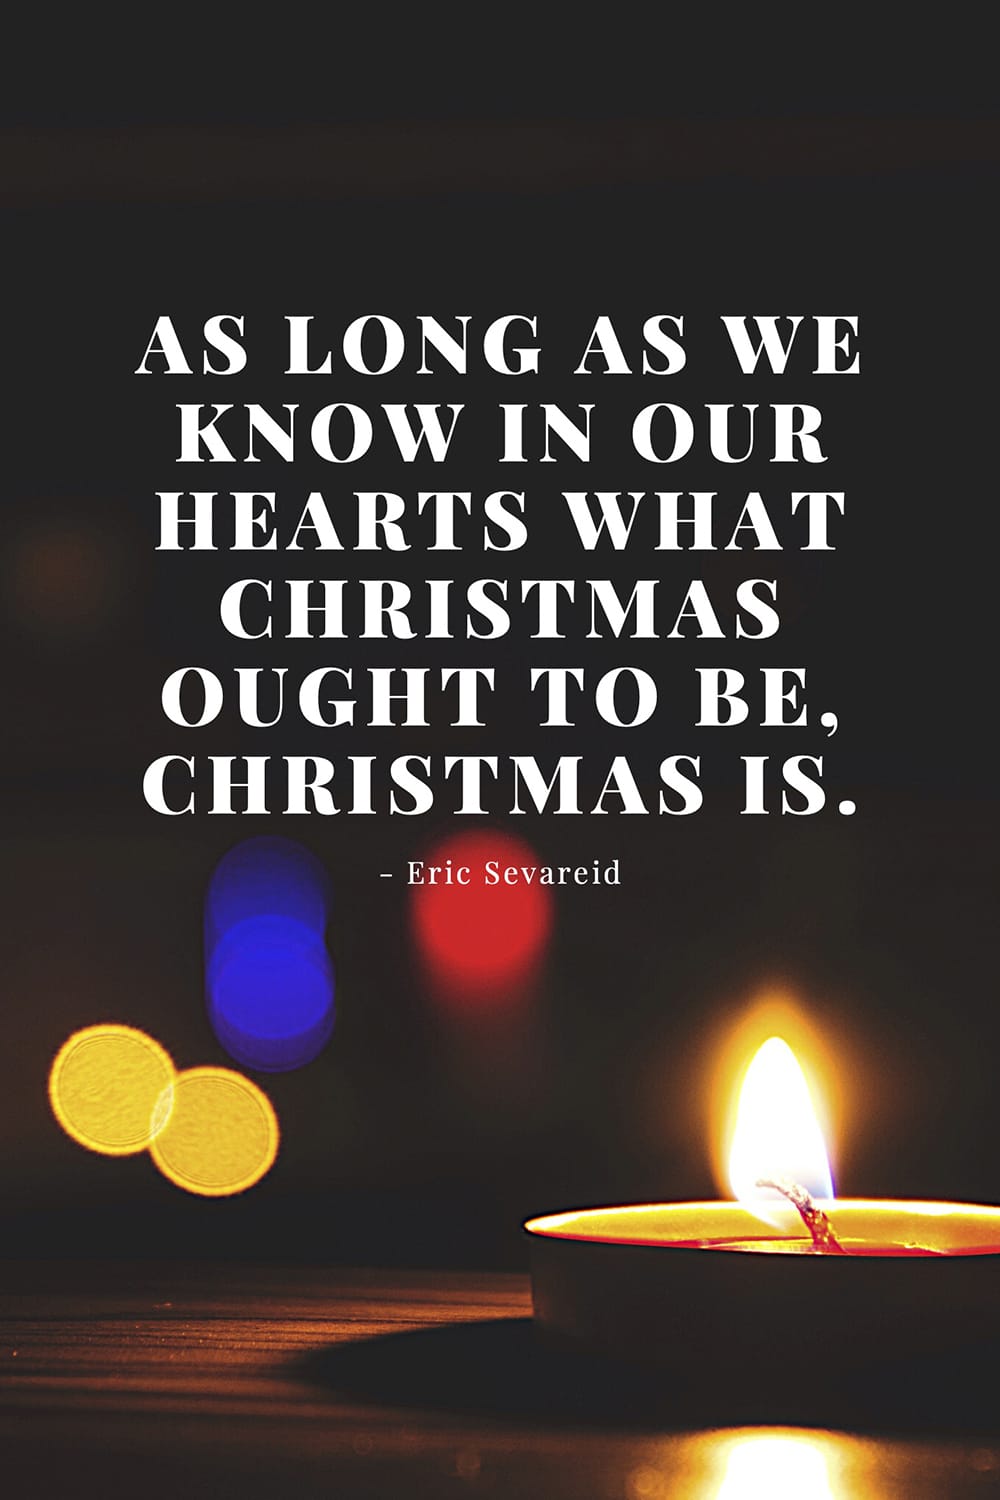 Best short Christmas quotes 25